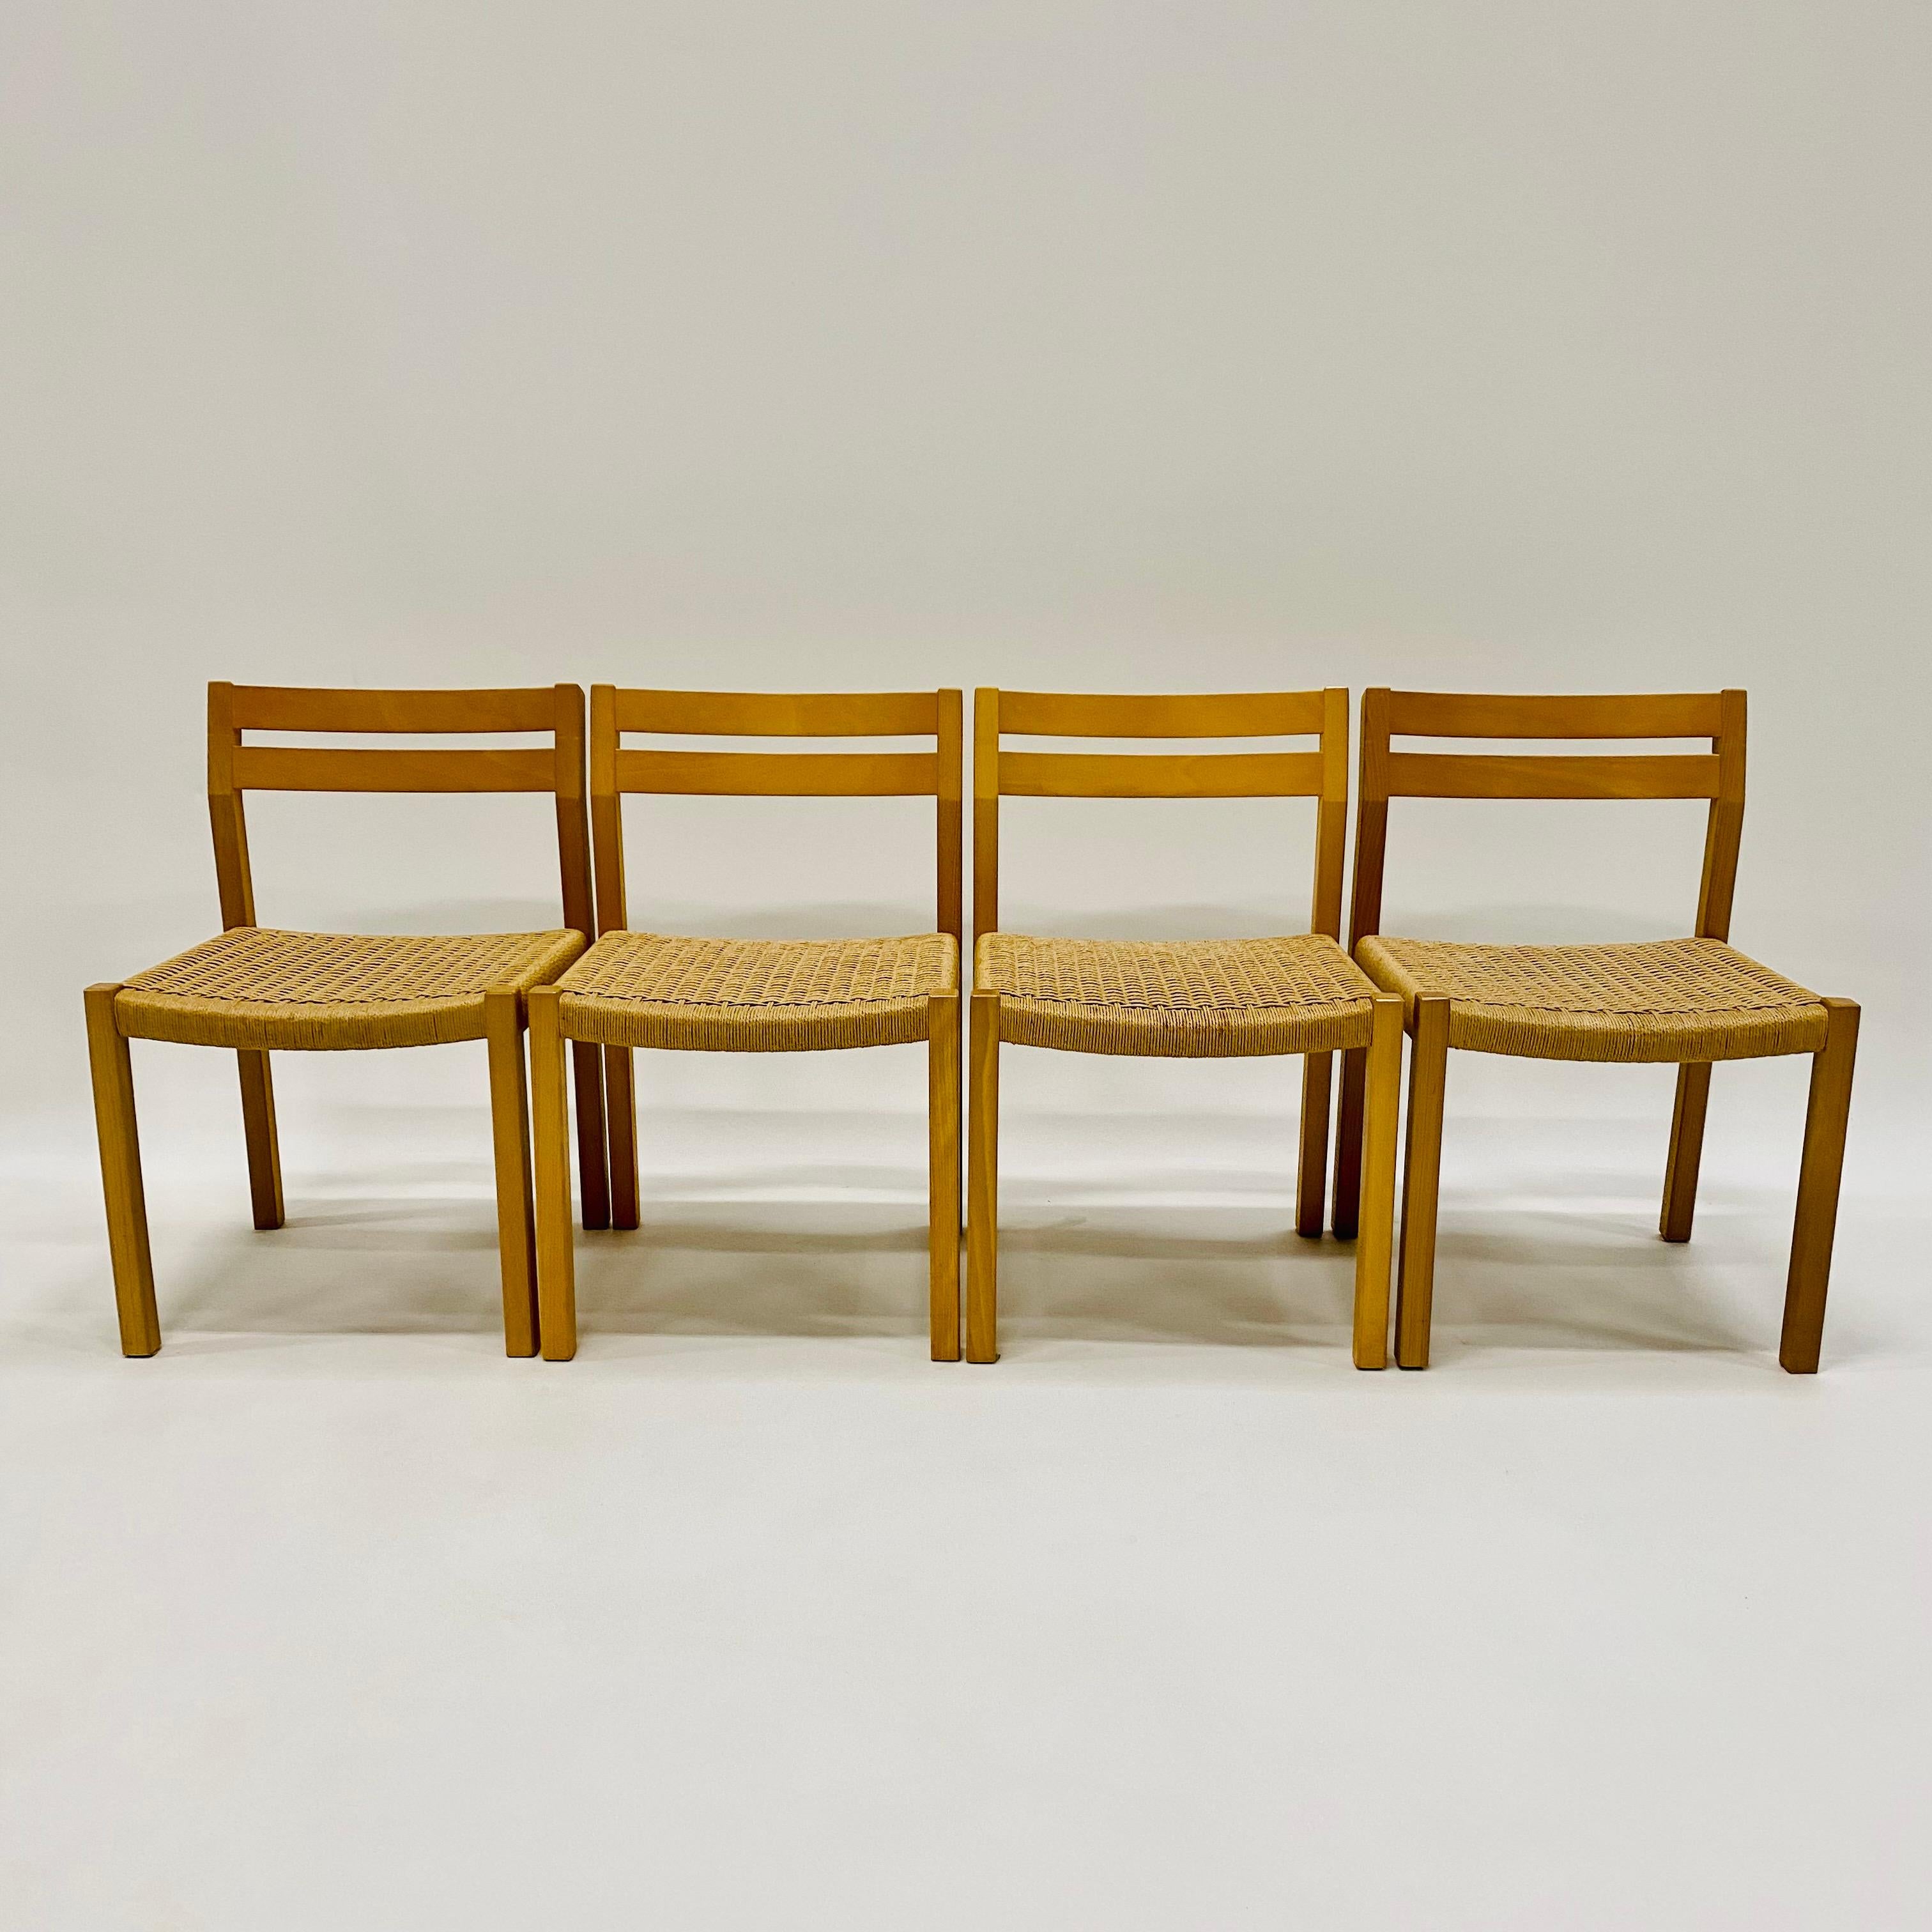 4 x J.L. Möller Papercord Dining Chairs by Niels O. Möller Denmark 1970 For Sale 6